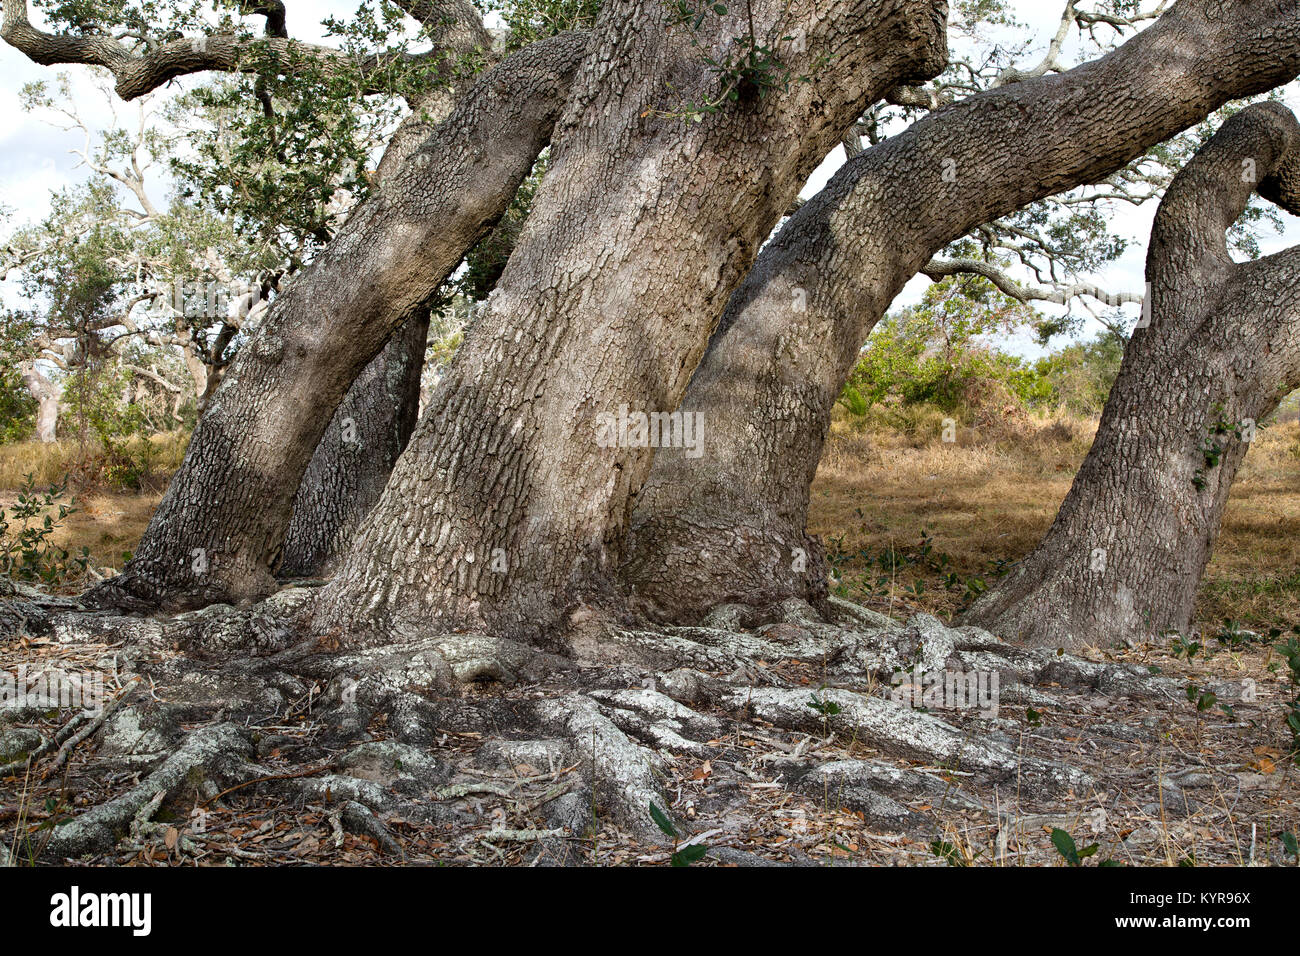 Grove of Coastal Live Oak  trees displaying surface roots  'Quercus virginiana'  Goose Island State Park. Stock Photo